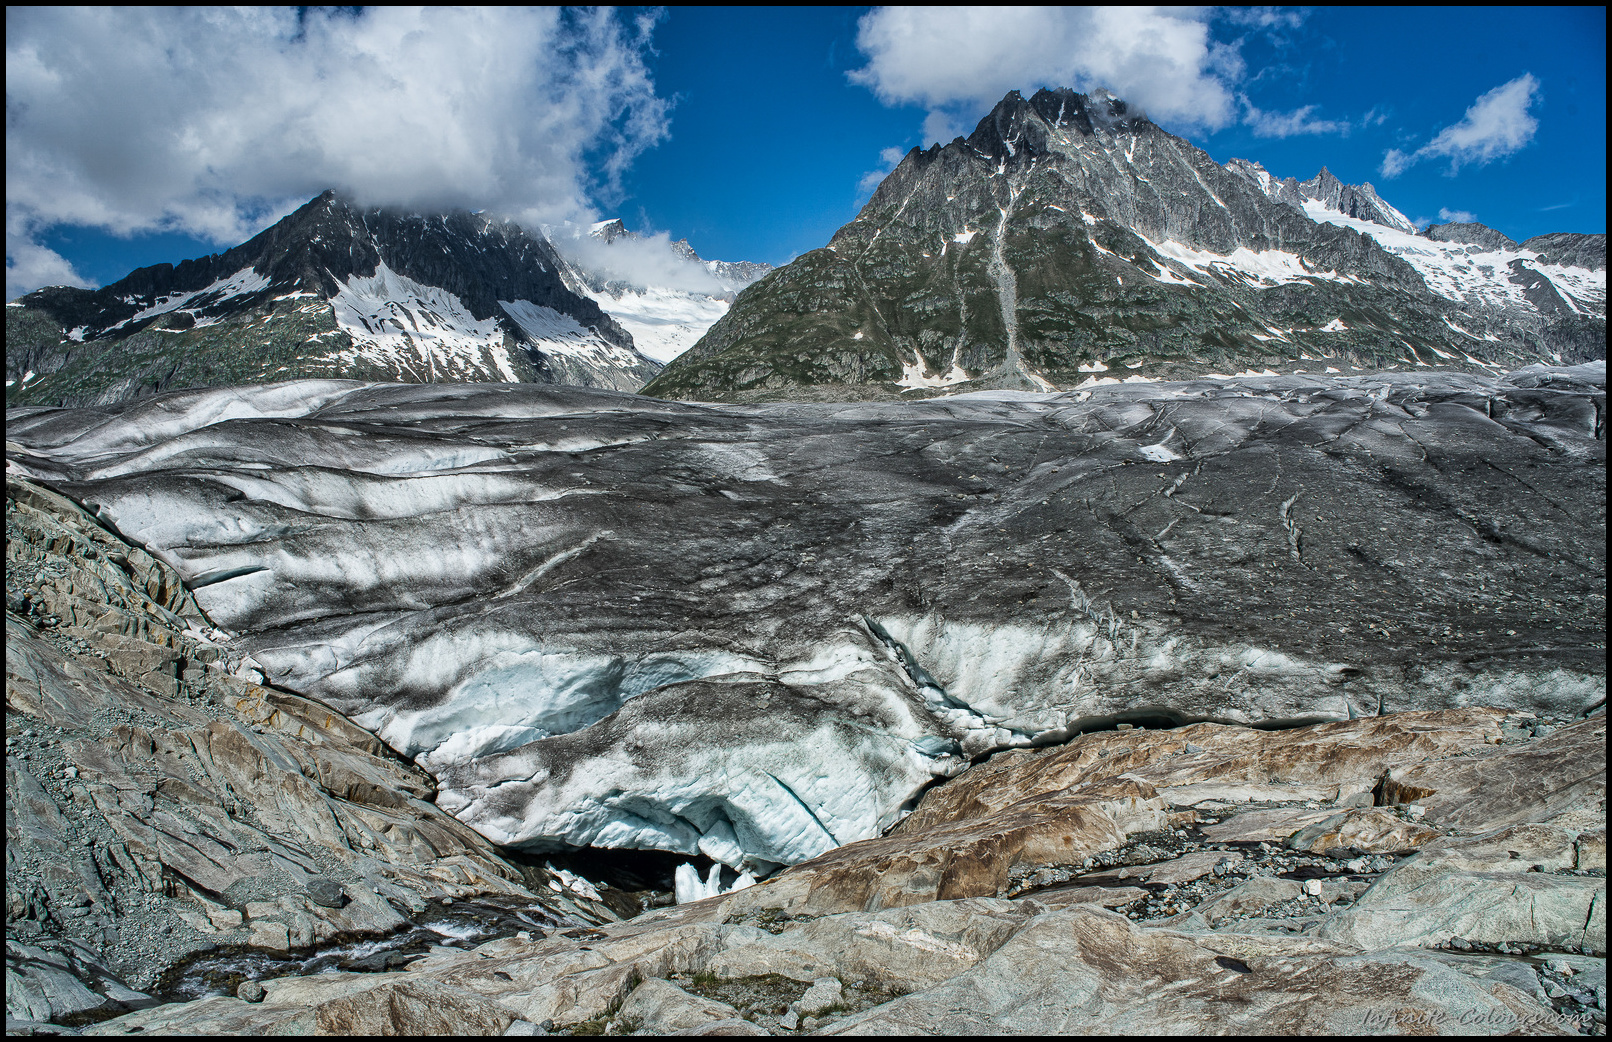 The outlow of the Märjelensee vanishes in the massive glacier